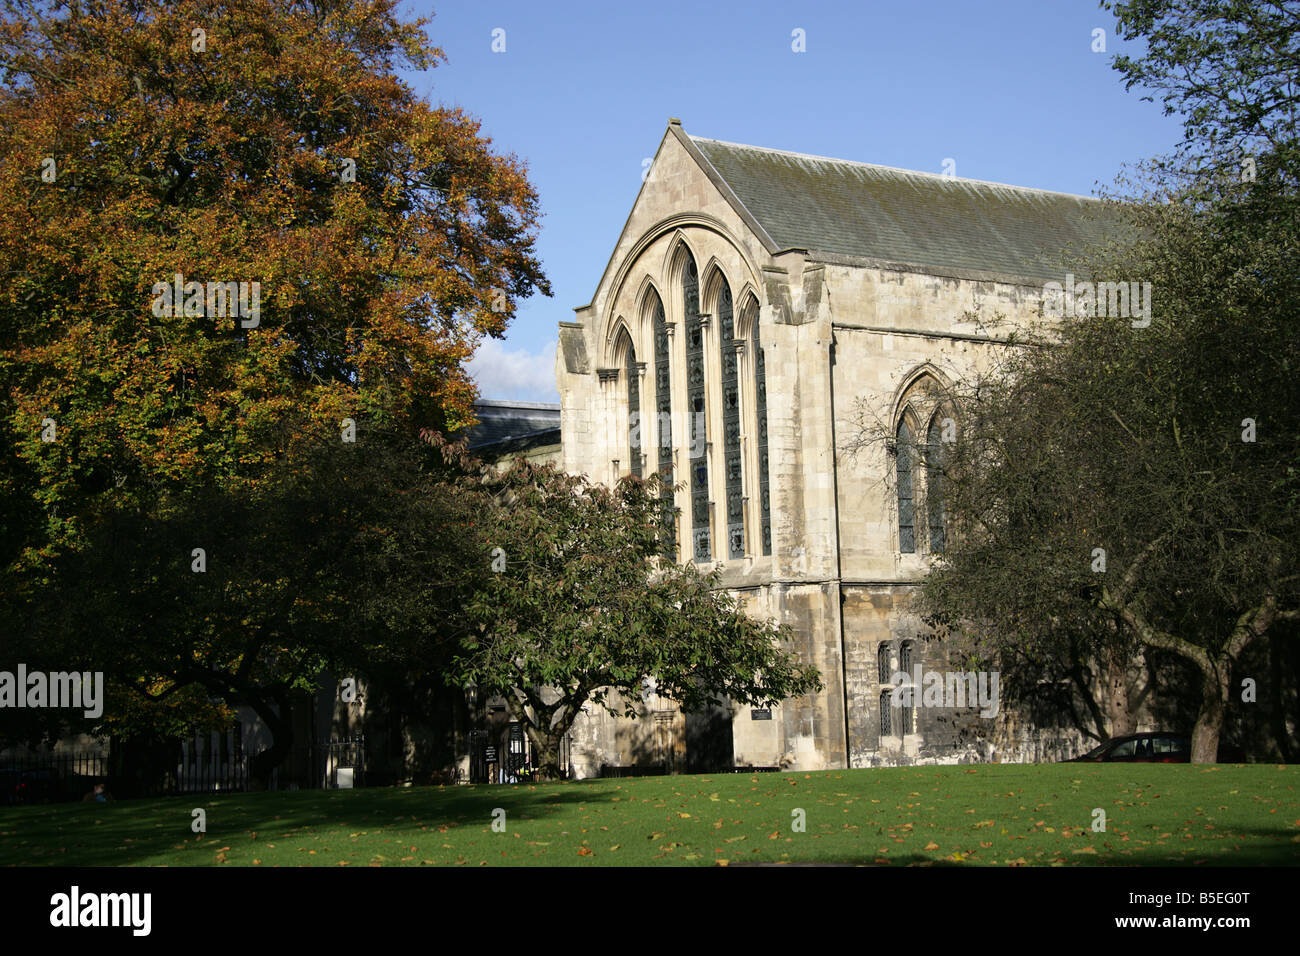 City of York, England. York Minster Library and Archives are housed in the former Archbishop’s Palace in Dean’s Park. Stock Photo